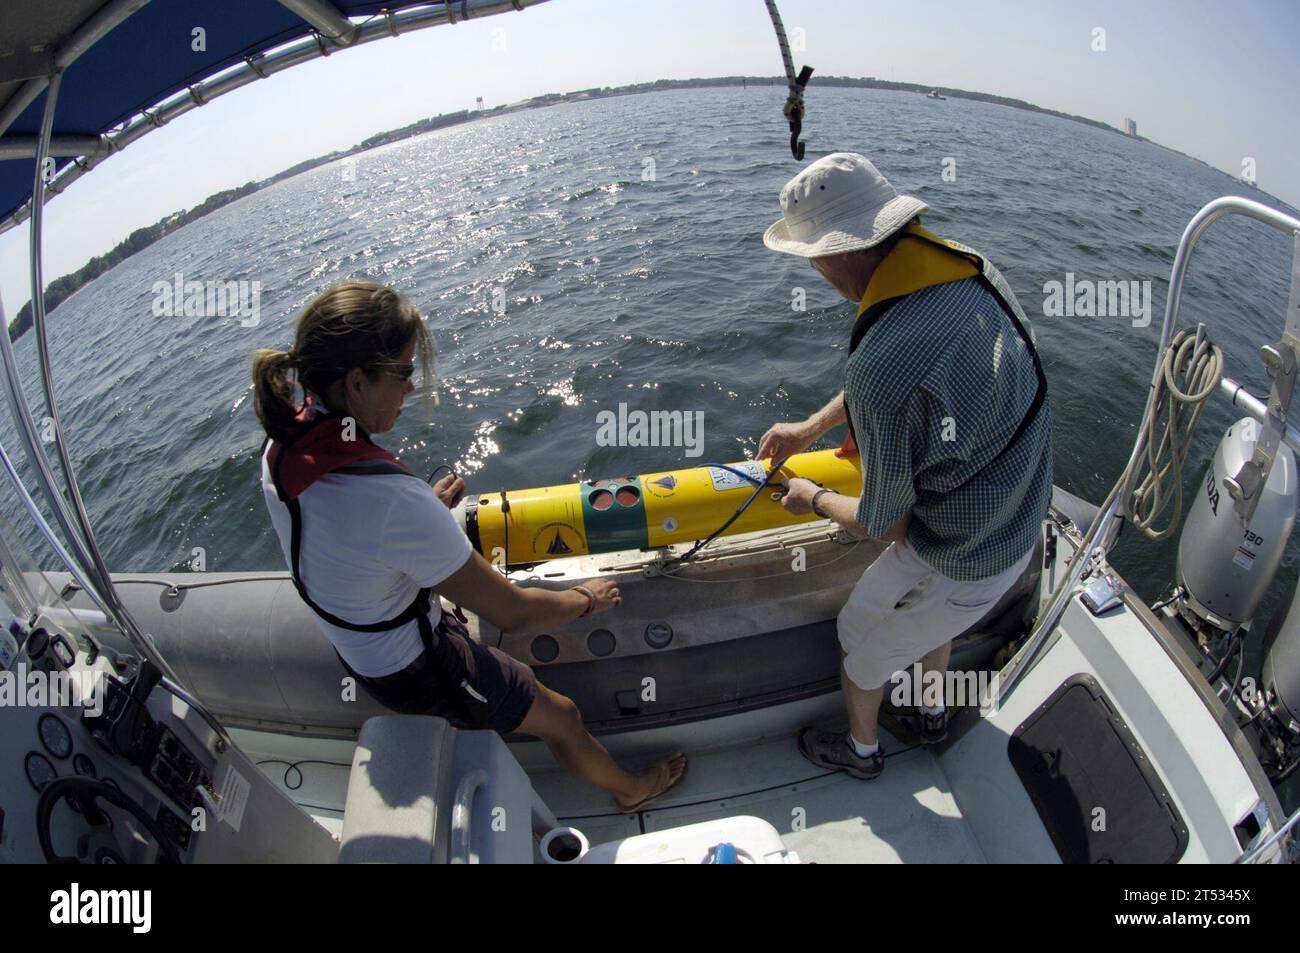 0706117676W-166 PANAMA CITY BEACH, Fla. (June 11, 2007) - Amy Kukulya and Tom Austin, both from the Woods Hole Oceanographic Institution, prepare to launch a Remote Environmental Monitoring Units (REMUS) during Autonomous Underwater Vehicle (AUV) Fest 2007, hosted by the Naval Surface Warfare Center Panama City and sponsored by the Office of Naval Research. Capable of performing rapid environmental surveys, REMUS also functions as an underwater mine reconnaissance device for the NavyХs mine countermeasures program. AUV Fest is the largest in-water demonstration of unmanned underwater, surface, Stock Photo